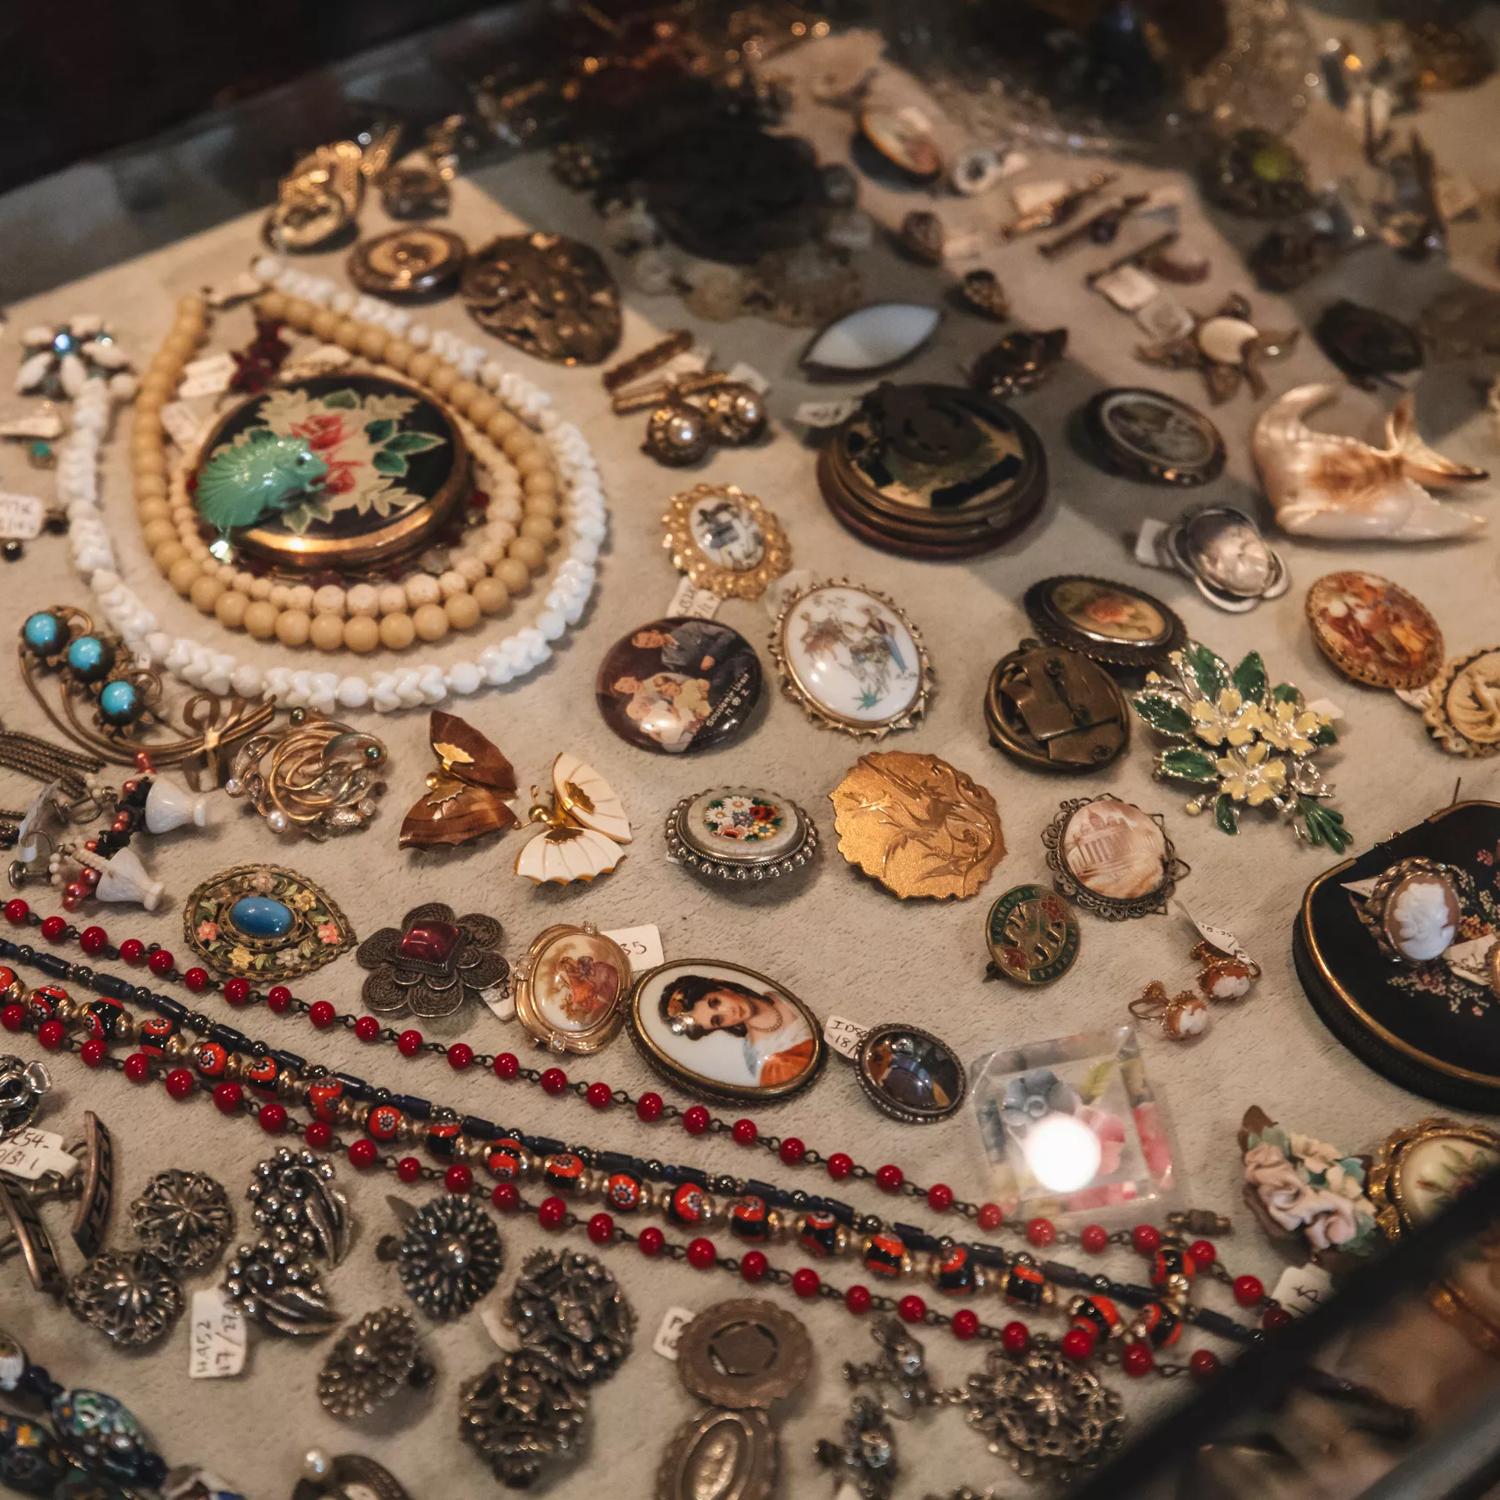 Antique earrings, necklaces and broaches, in a display case at Ziggurat, a secondhand store located in Wellington, New Zealand. 